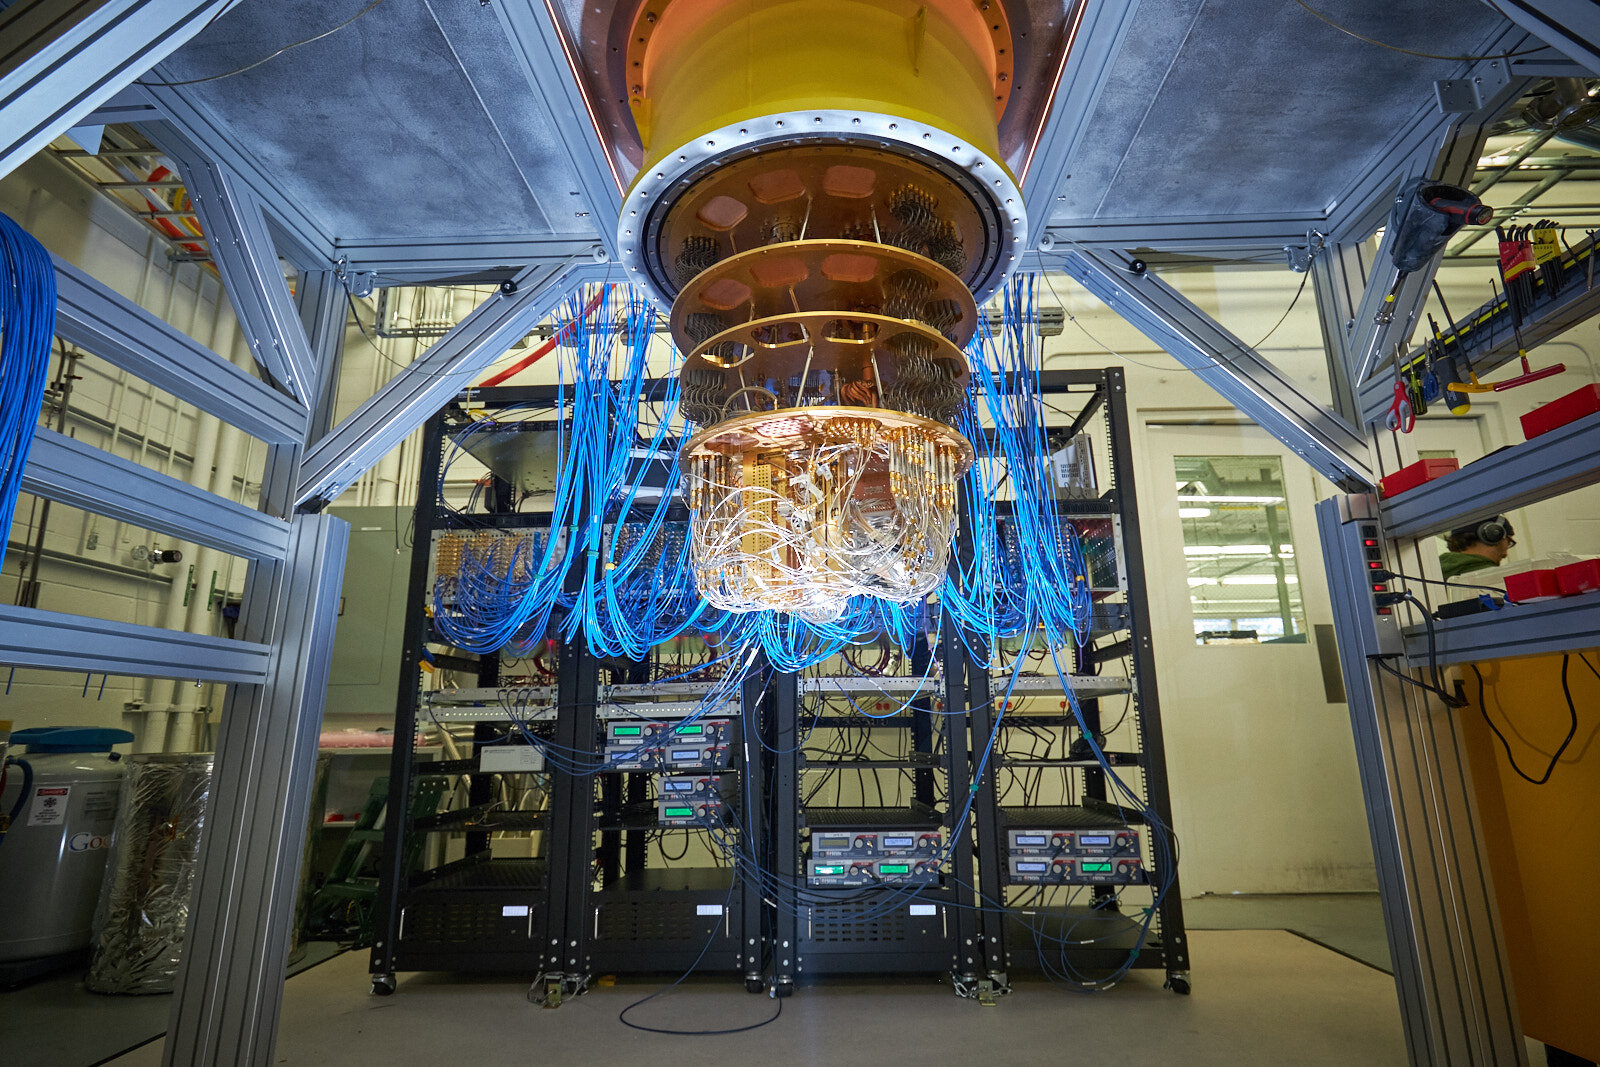 Google's Sycamore Quantum computer with 53 qubits power; because its all about privacy 